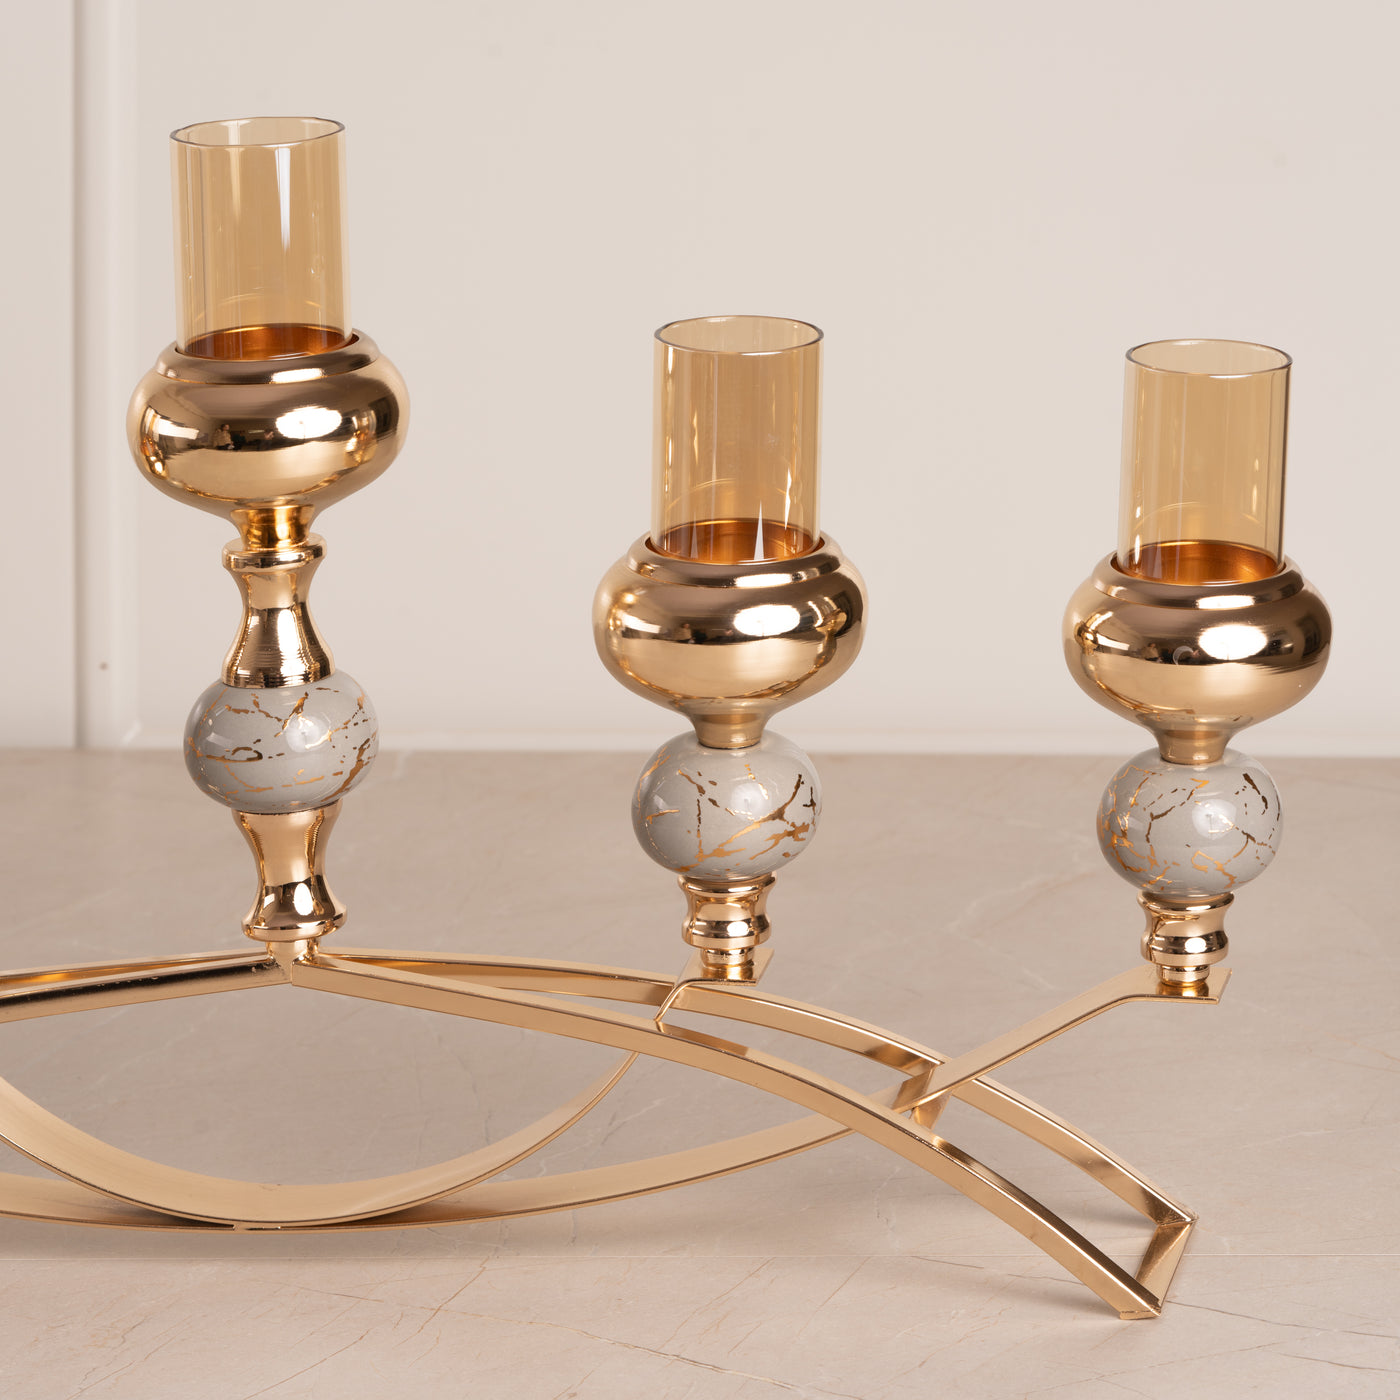 Bulb Mosaic Double Arc Candle Stand